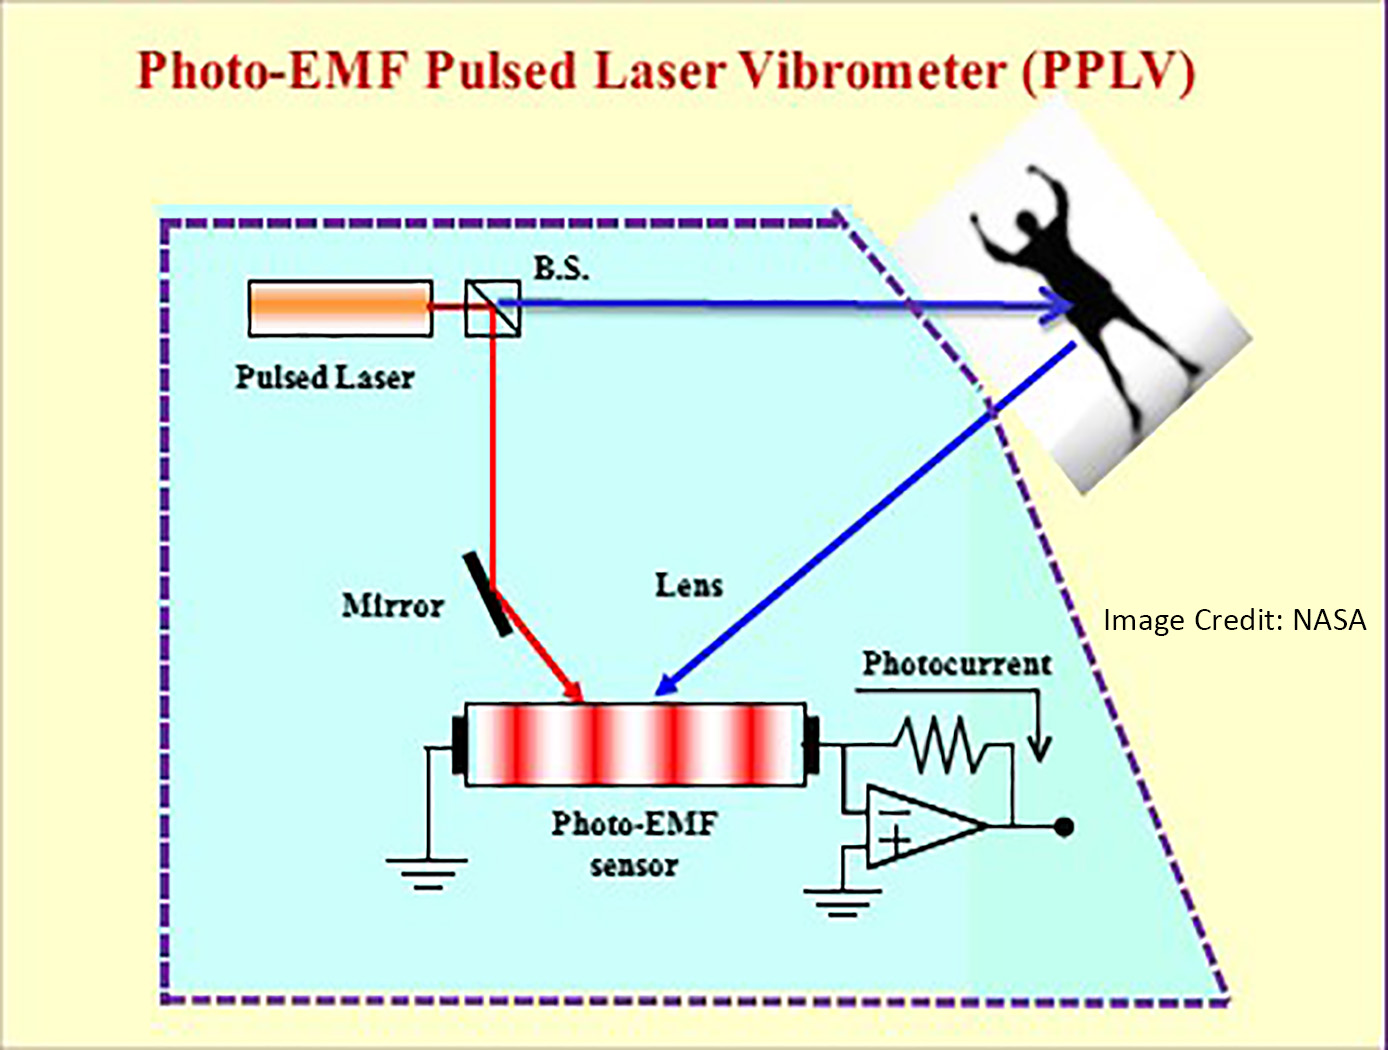 Schematic Representation of laser Vibrometer for health Monitoring